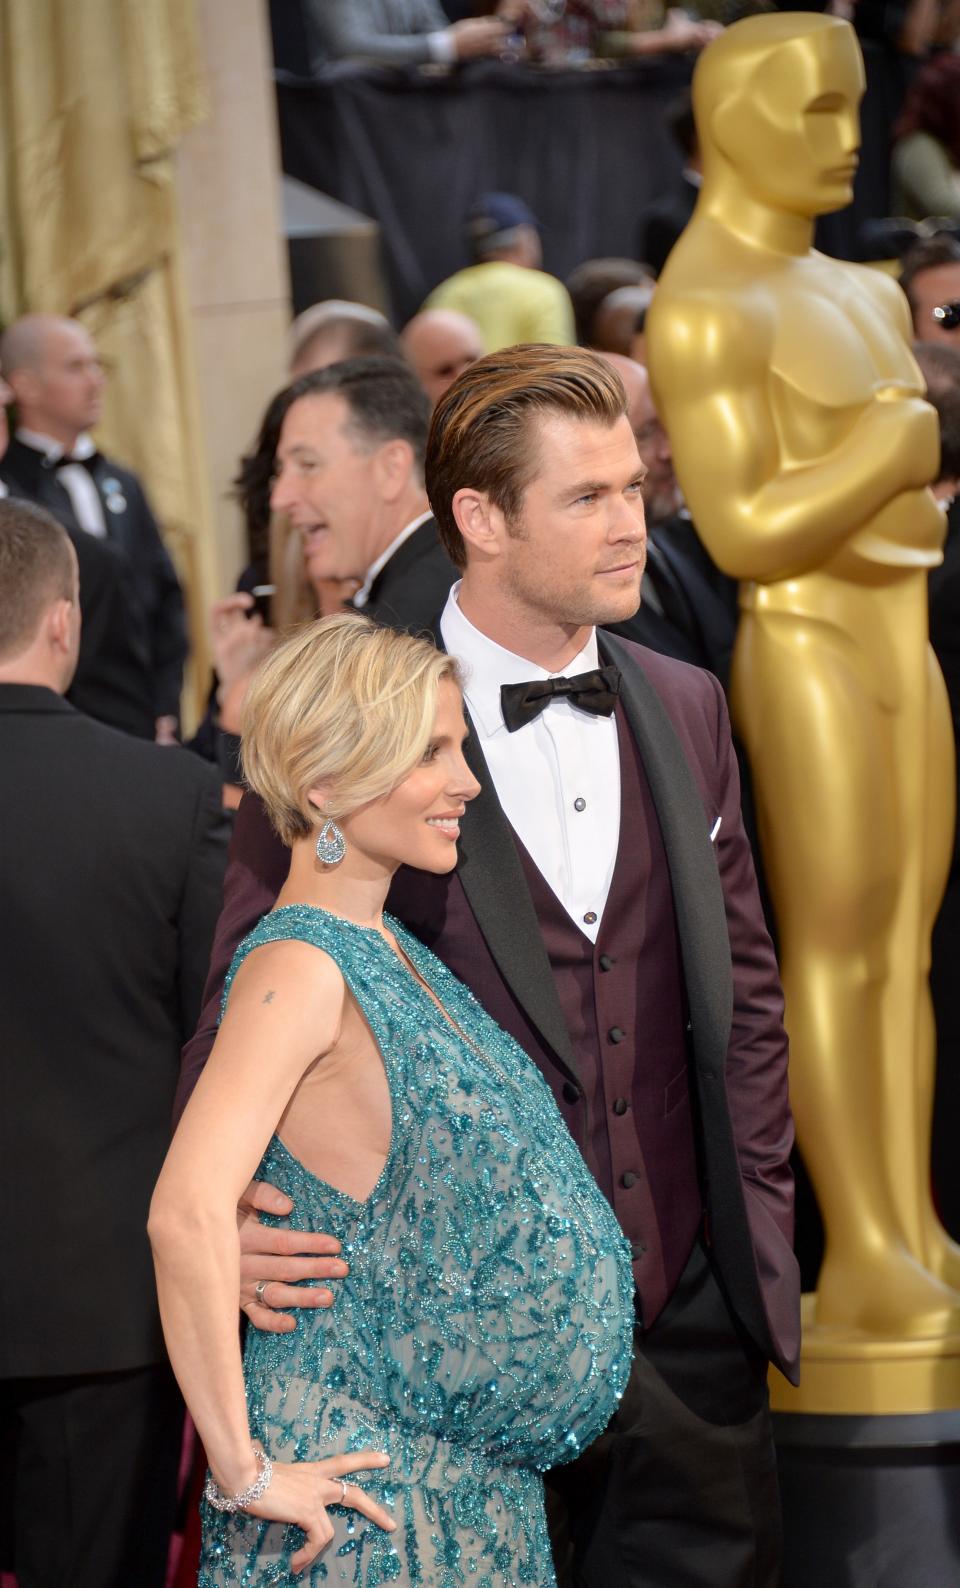 Pataky and Hemsworth arrive at the 86th annual Academy Awards in 2014.